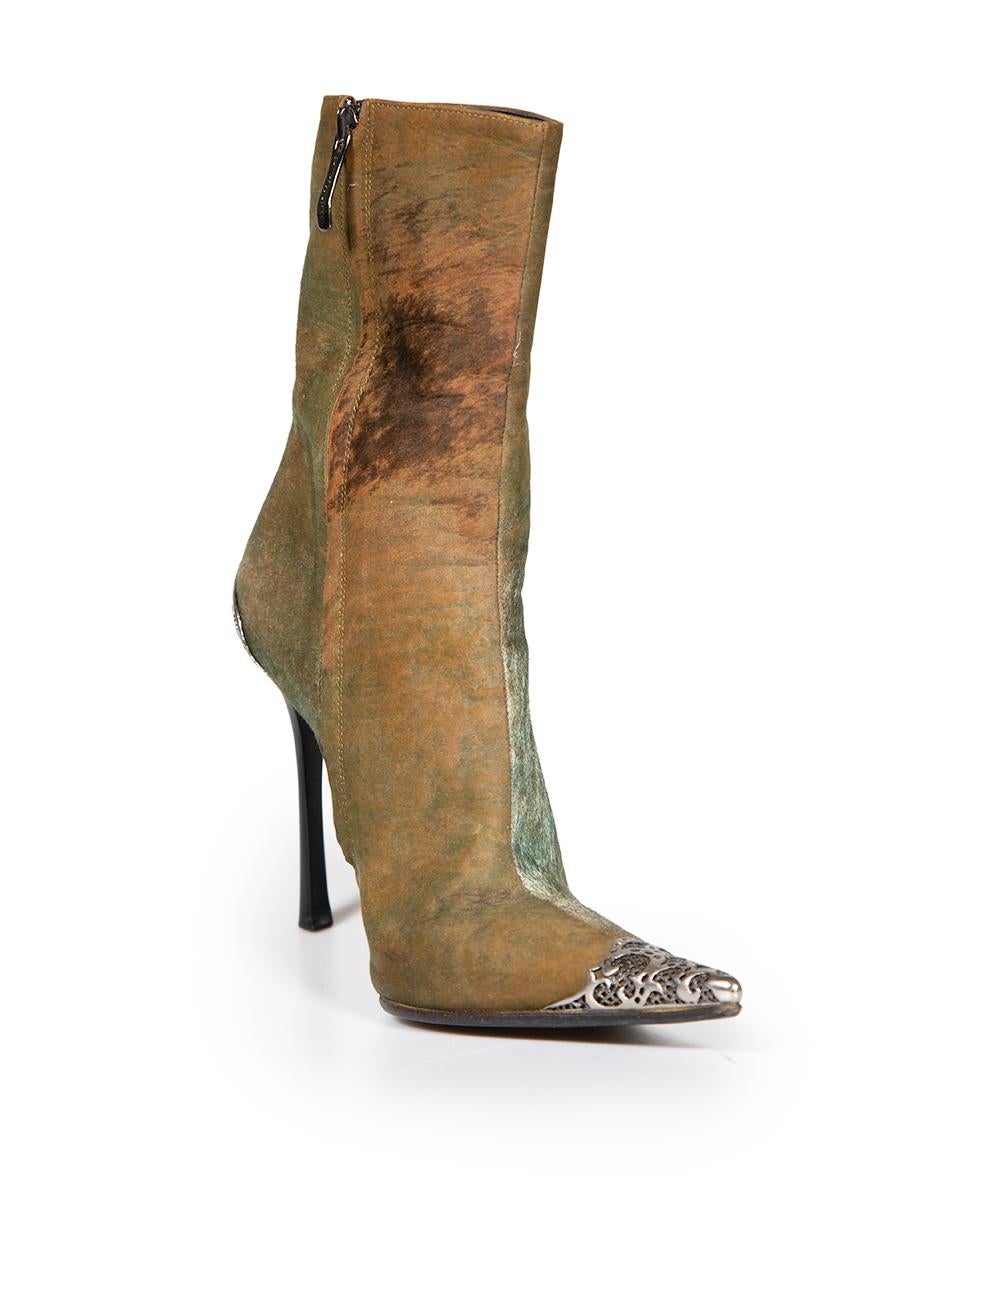 CONDITION is Very good. Hardly any visible wear to boots is evident on this used Gianmarco Lorenzi designer resale item.
 
 
 
 Details
 
 
 Green
 
 Ponyhair
 
 Cuban boots
 
 Point toe
 
 High heeled
 
 Side zip fastening
 
 Metal plated detail
 
